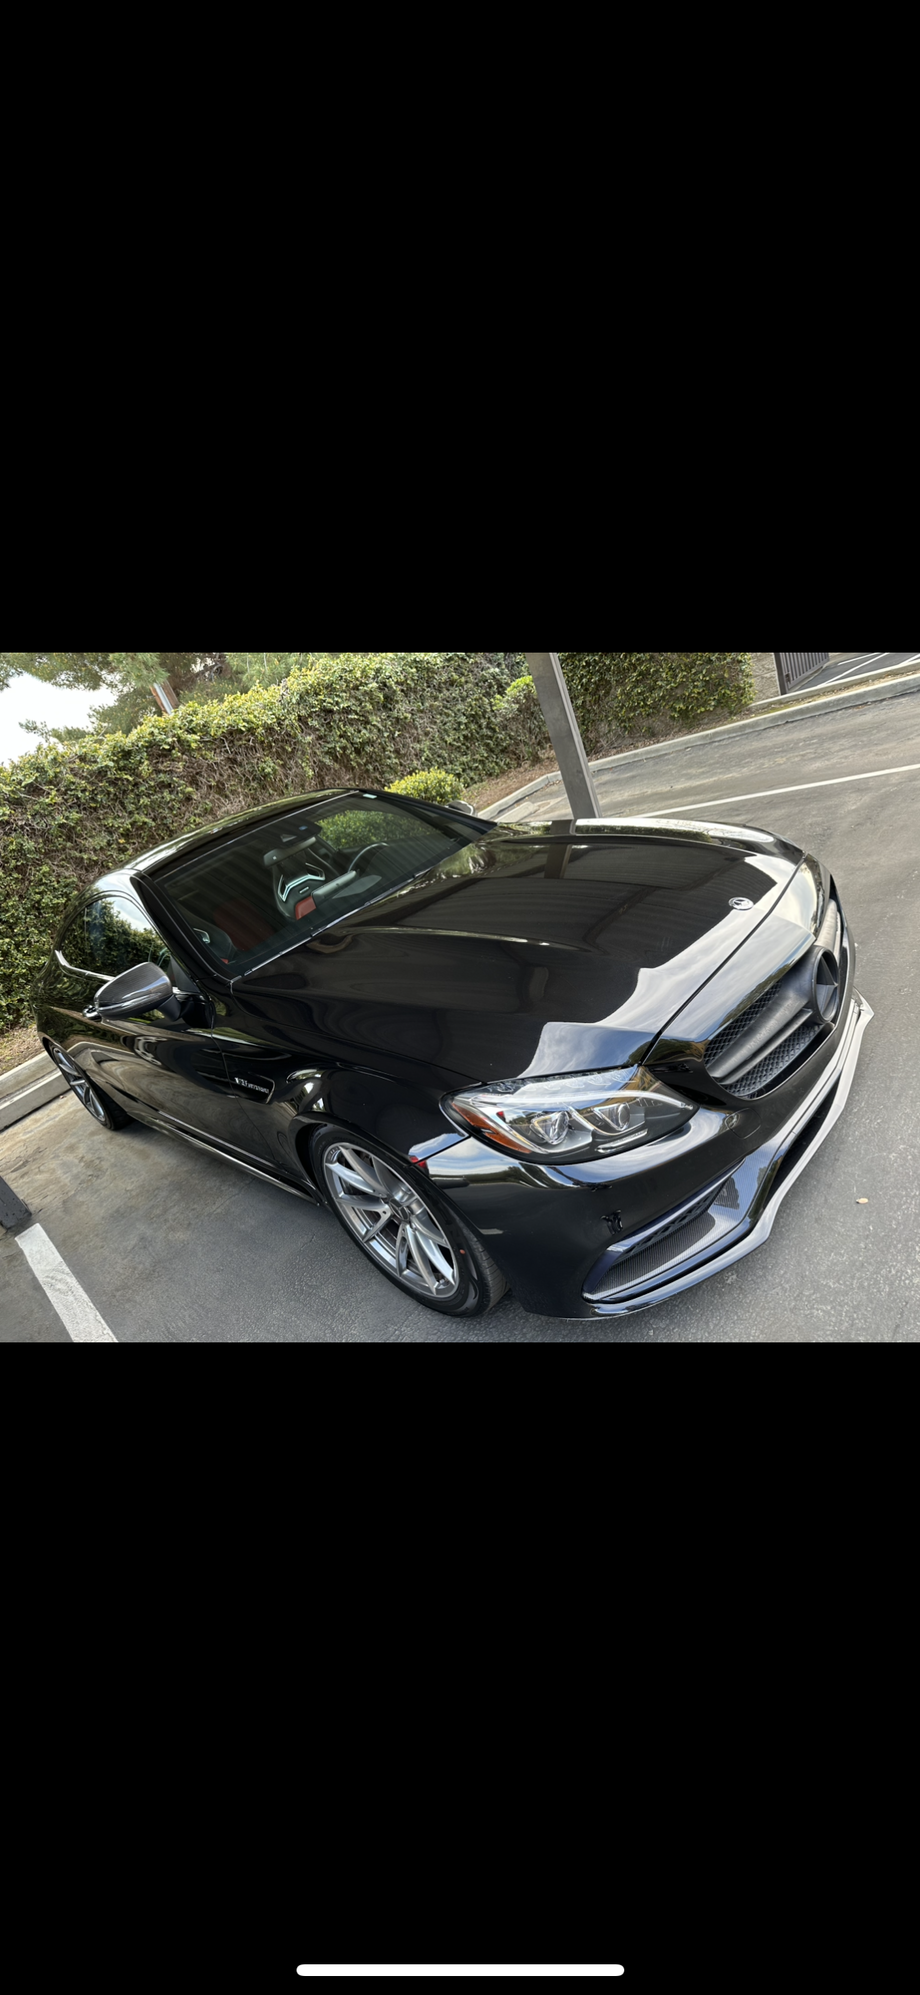 2018 Mercedes-Benz C63 AMG - 35k miles 2019 first owner cherry c63 amg coupe all maint done - Used - Bakersfield, CA 93312, United States